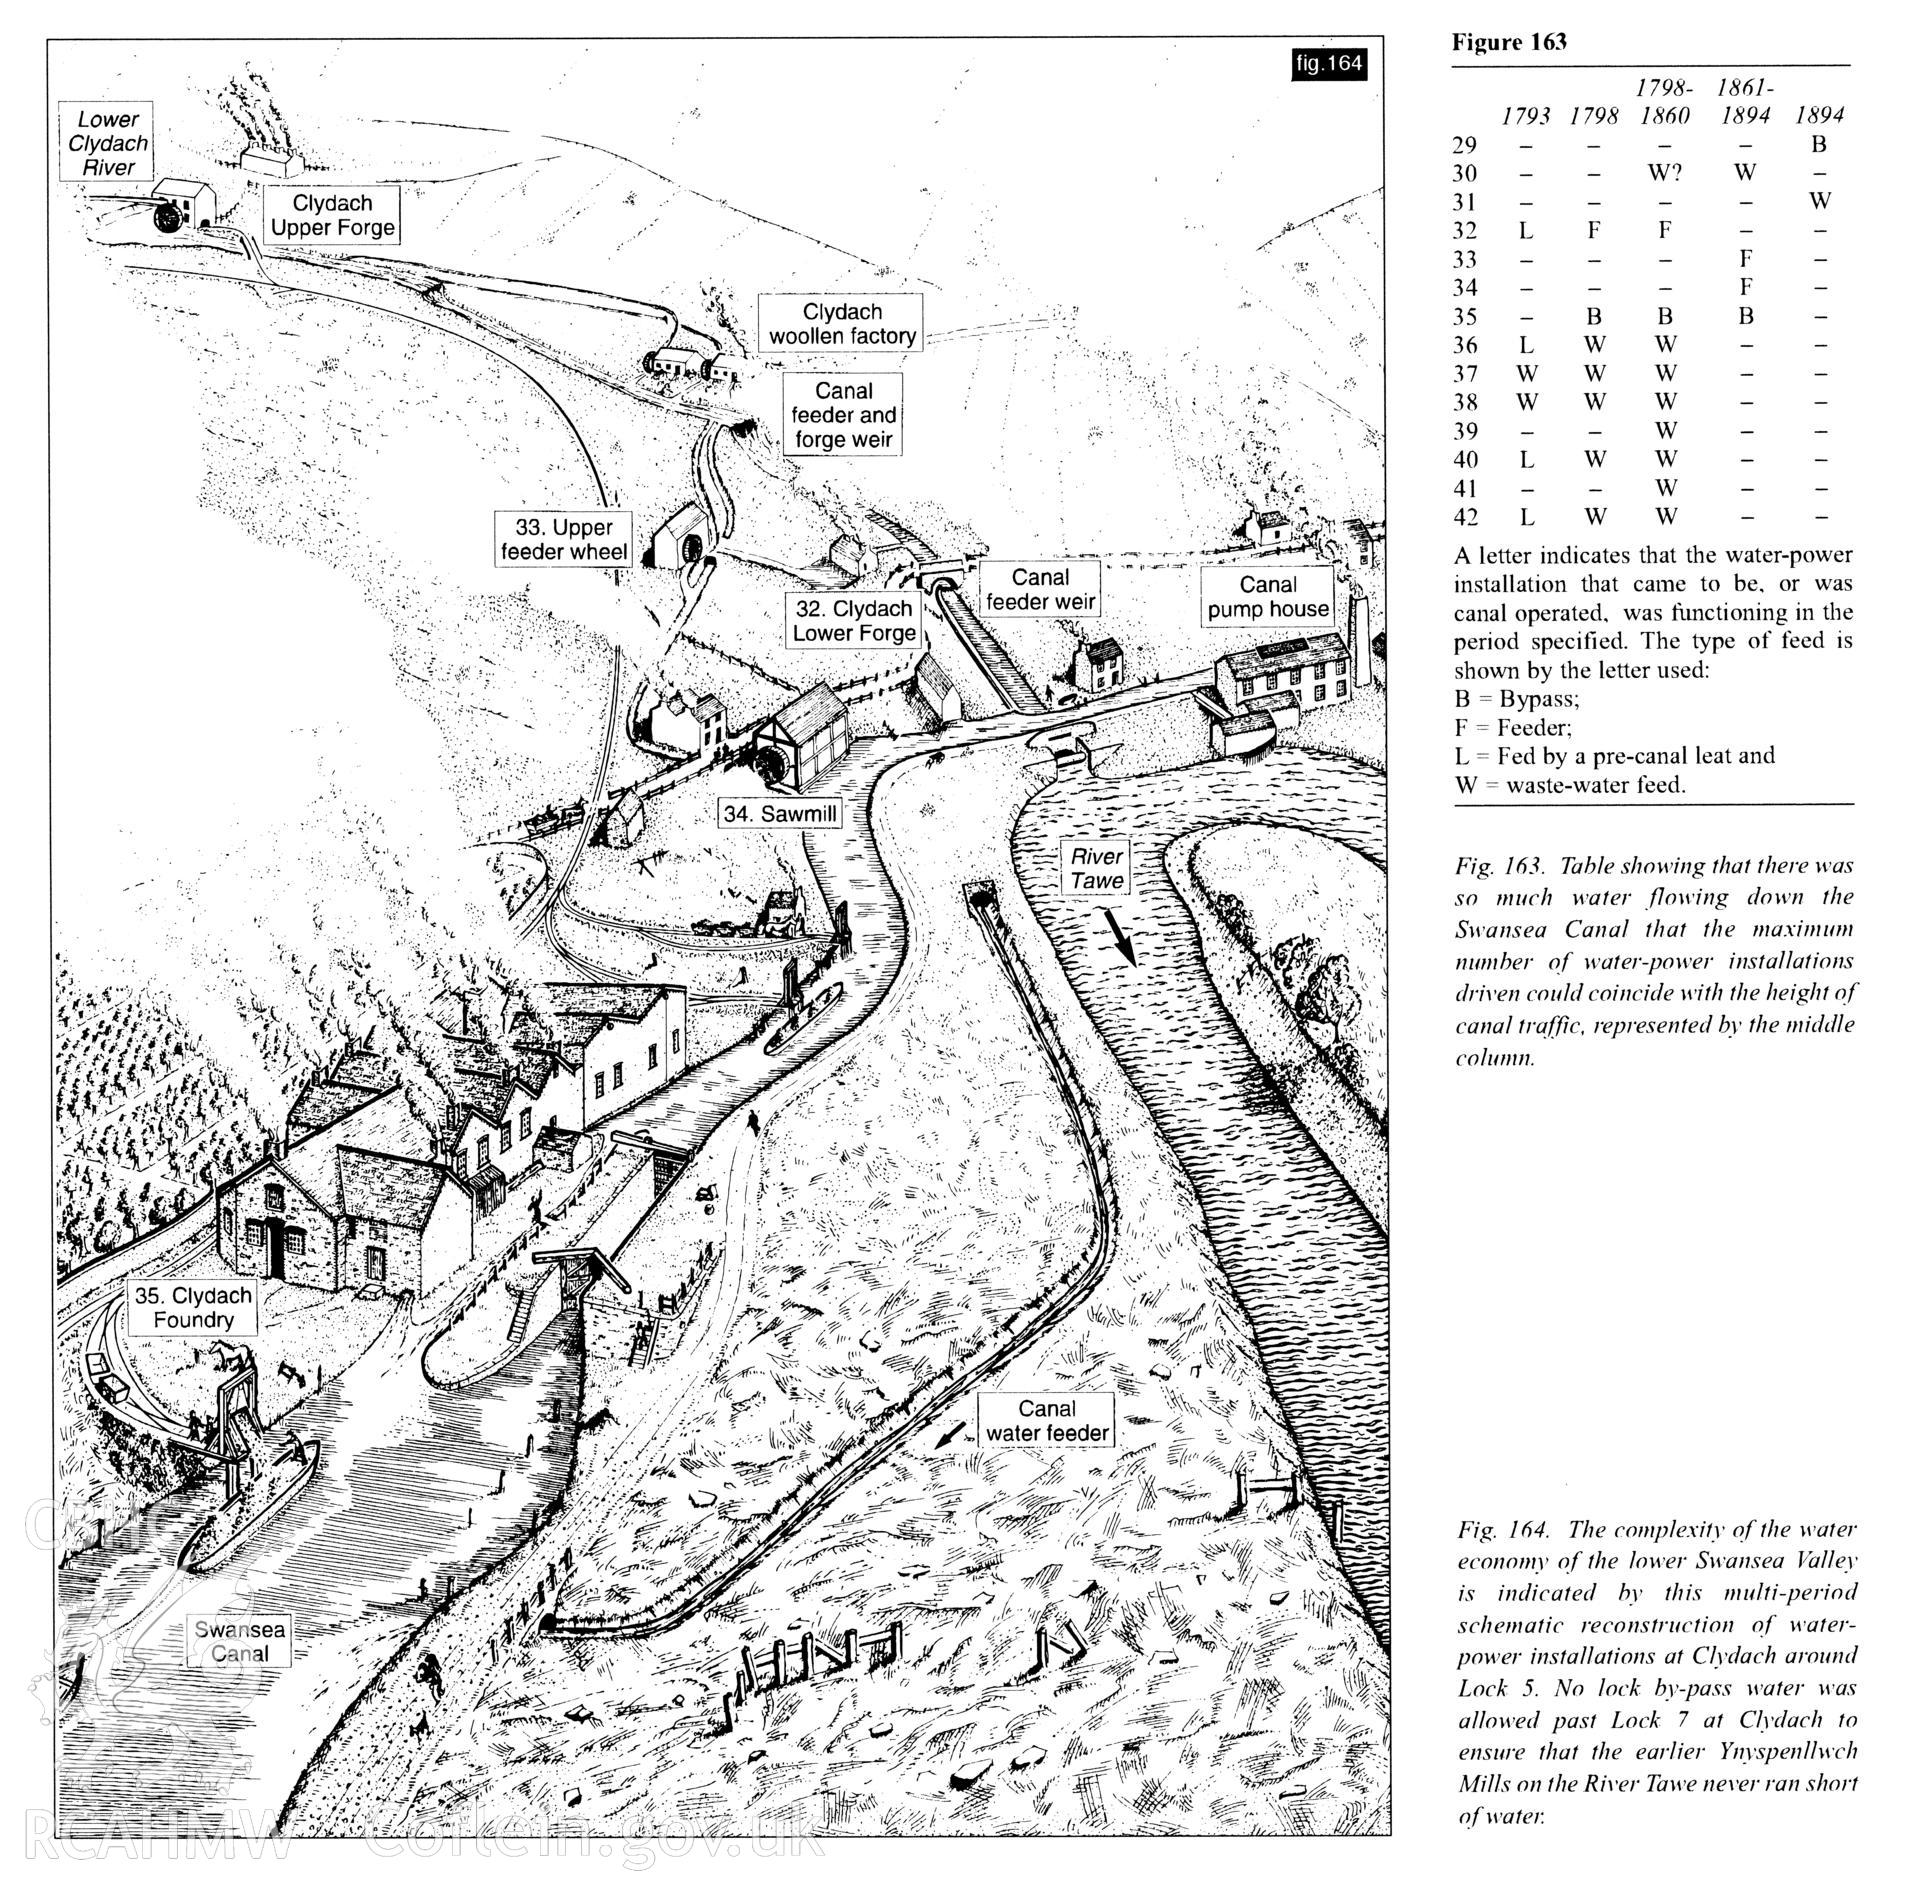 Copy of a reconstruction drawing showing water-powered installations at Clydach, used in S.R. Hughes' Copperopolis, p117, fig 164.